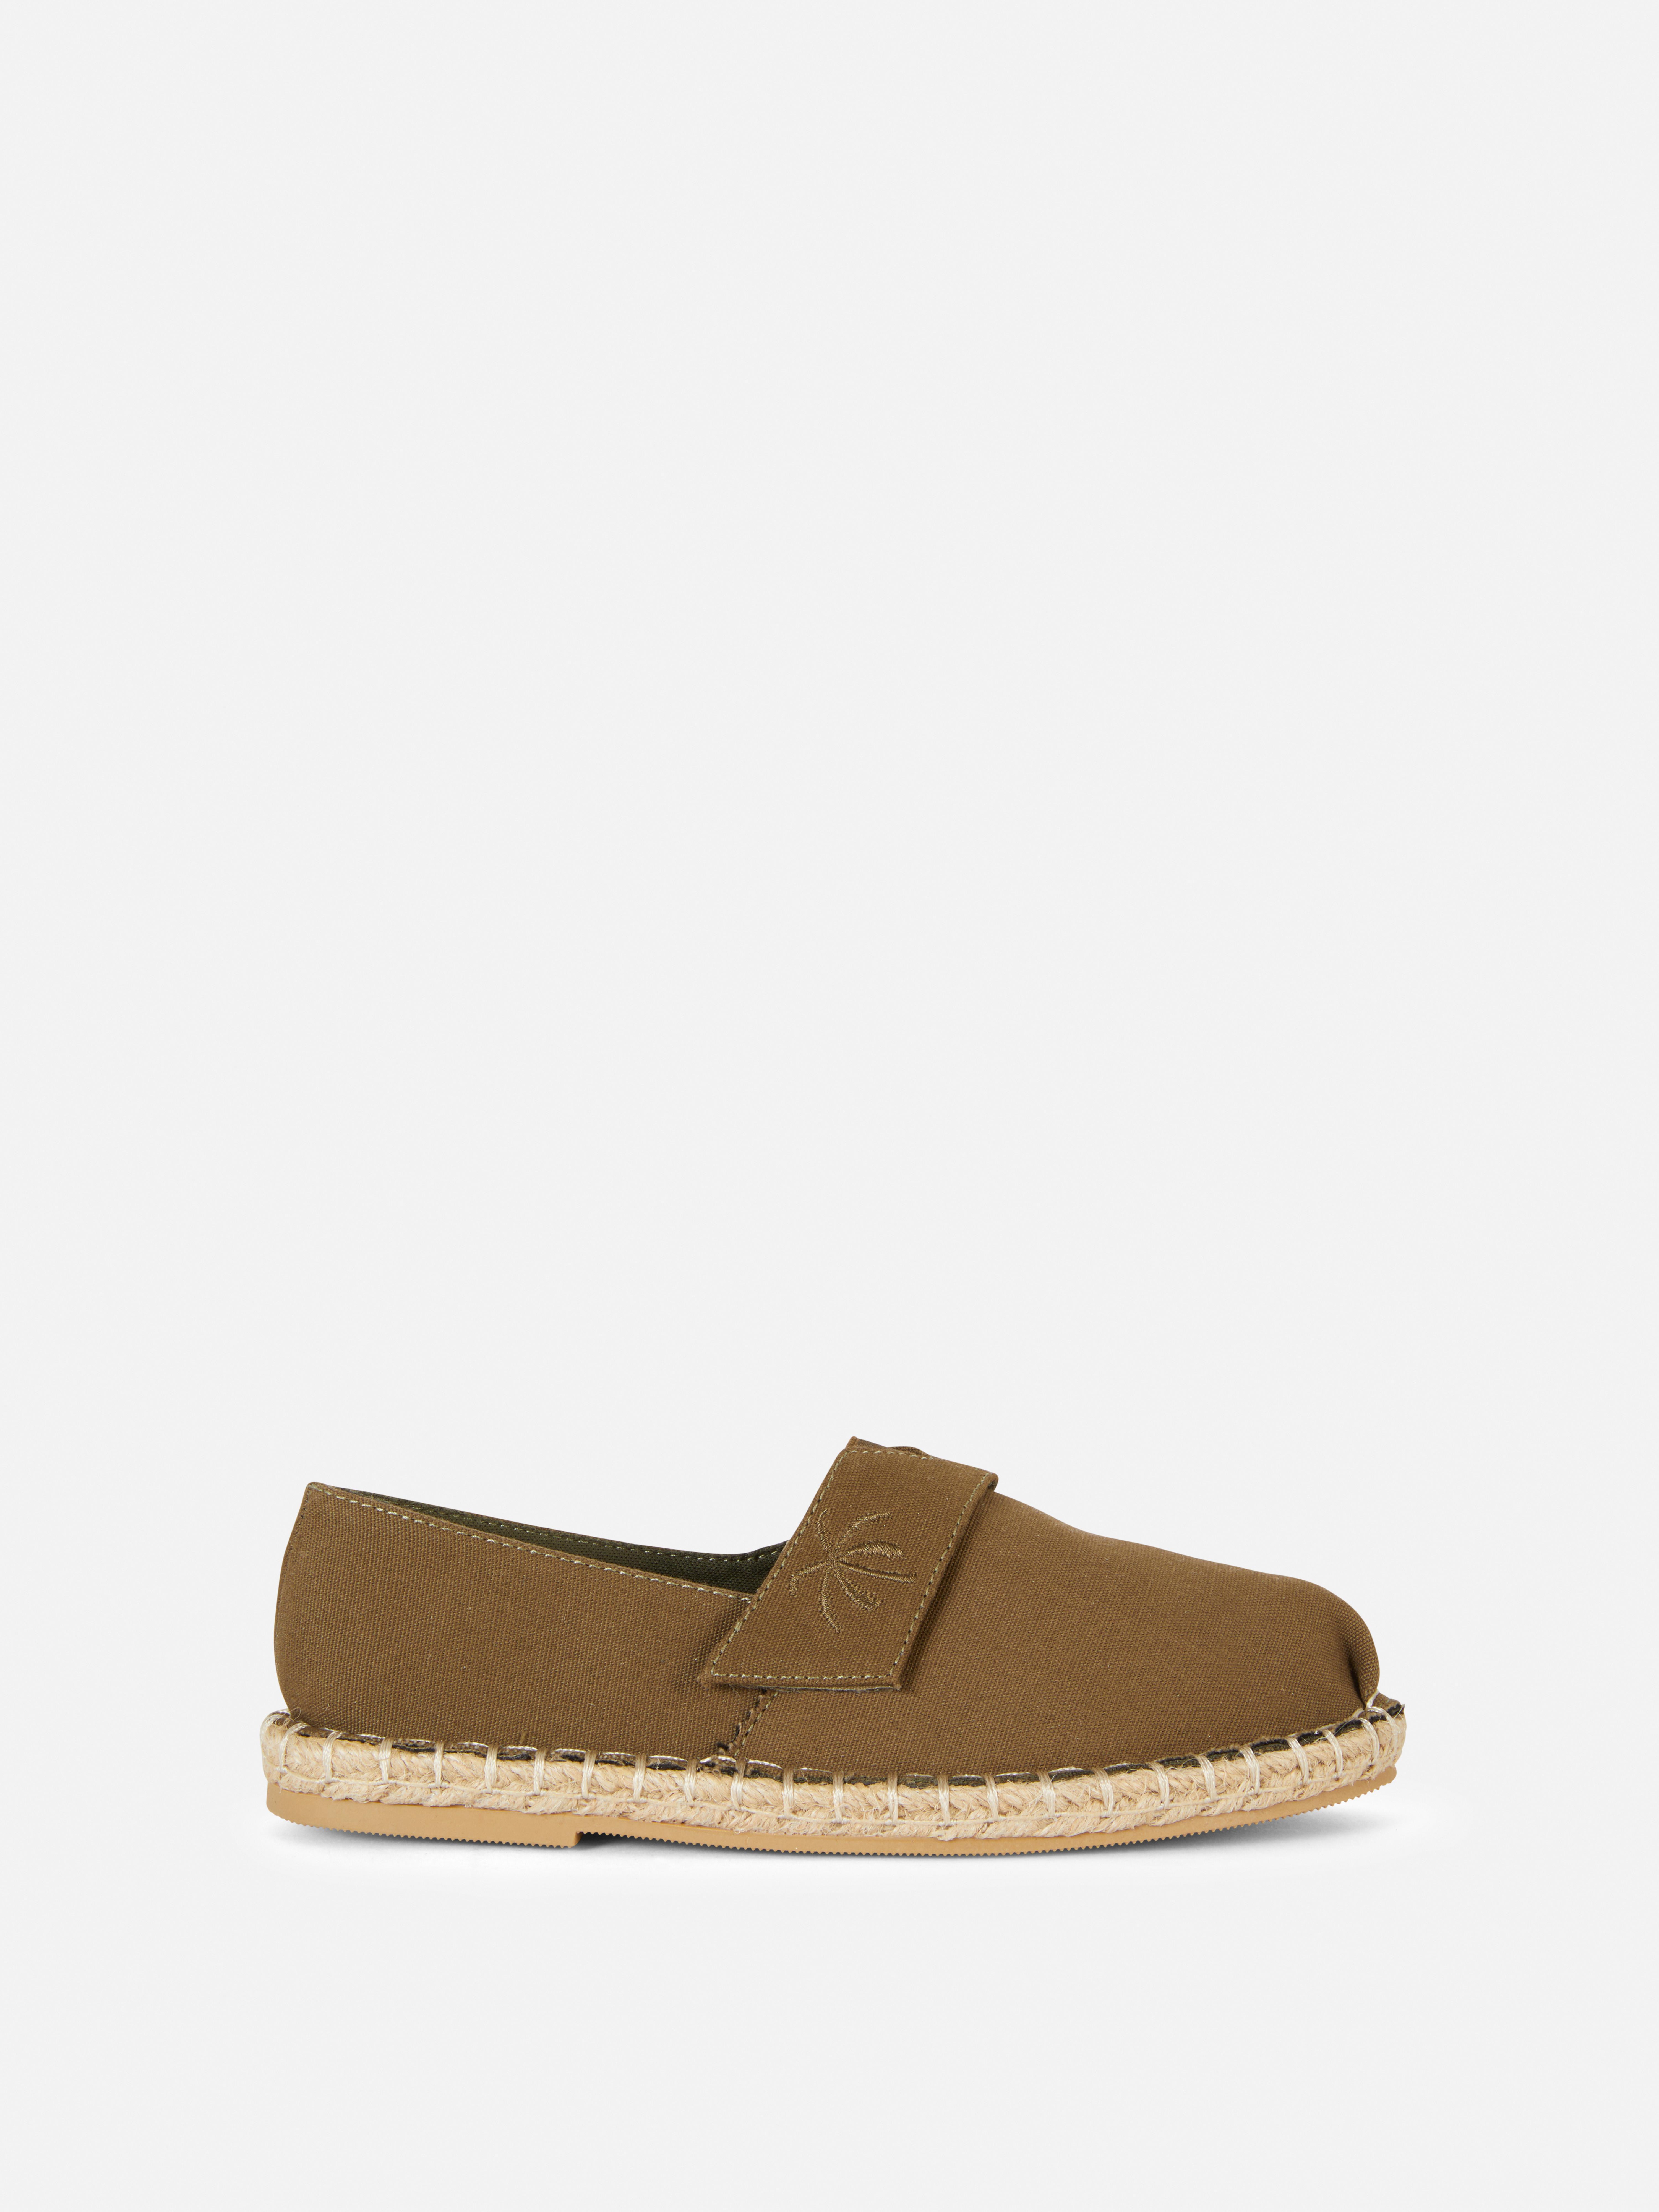 Velcro Strap-on Espadrille Shoes